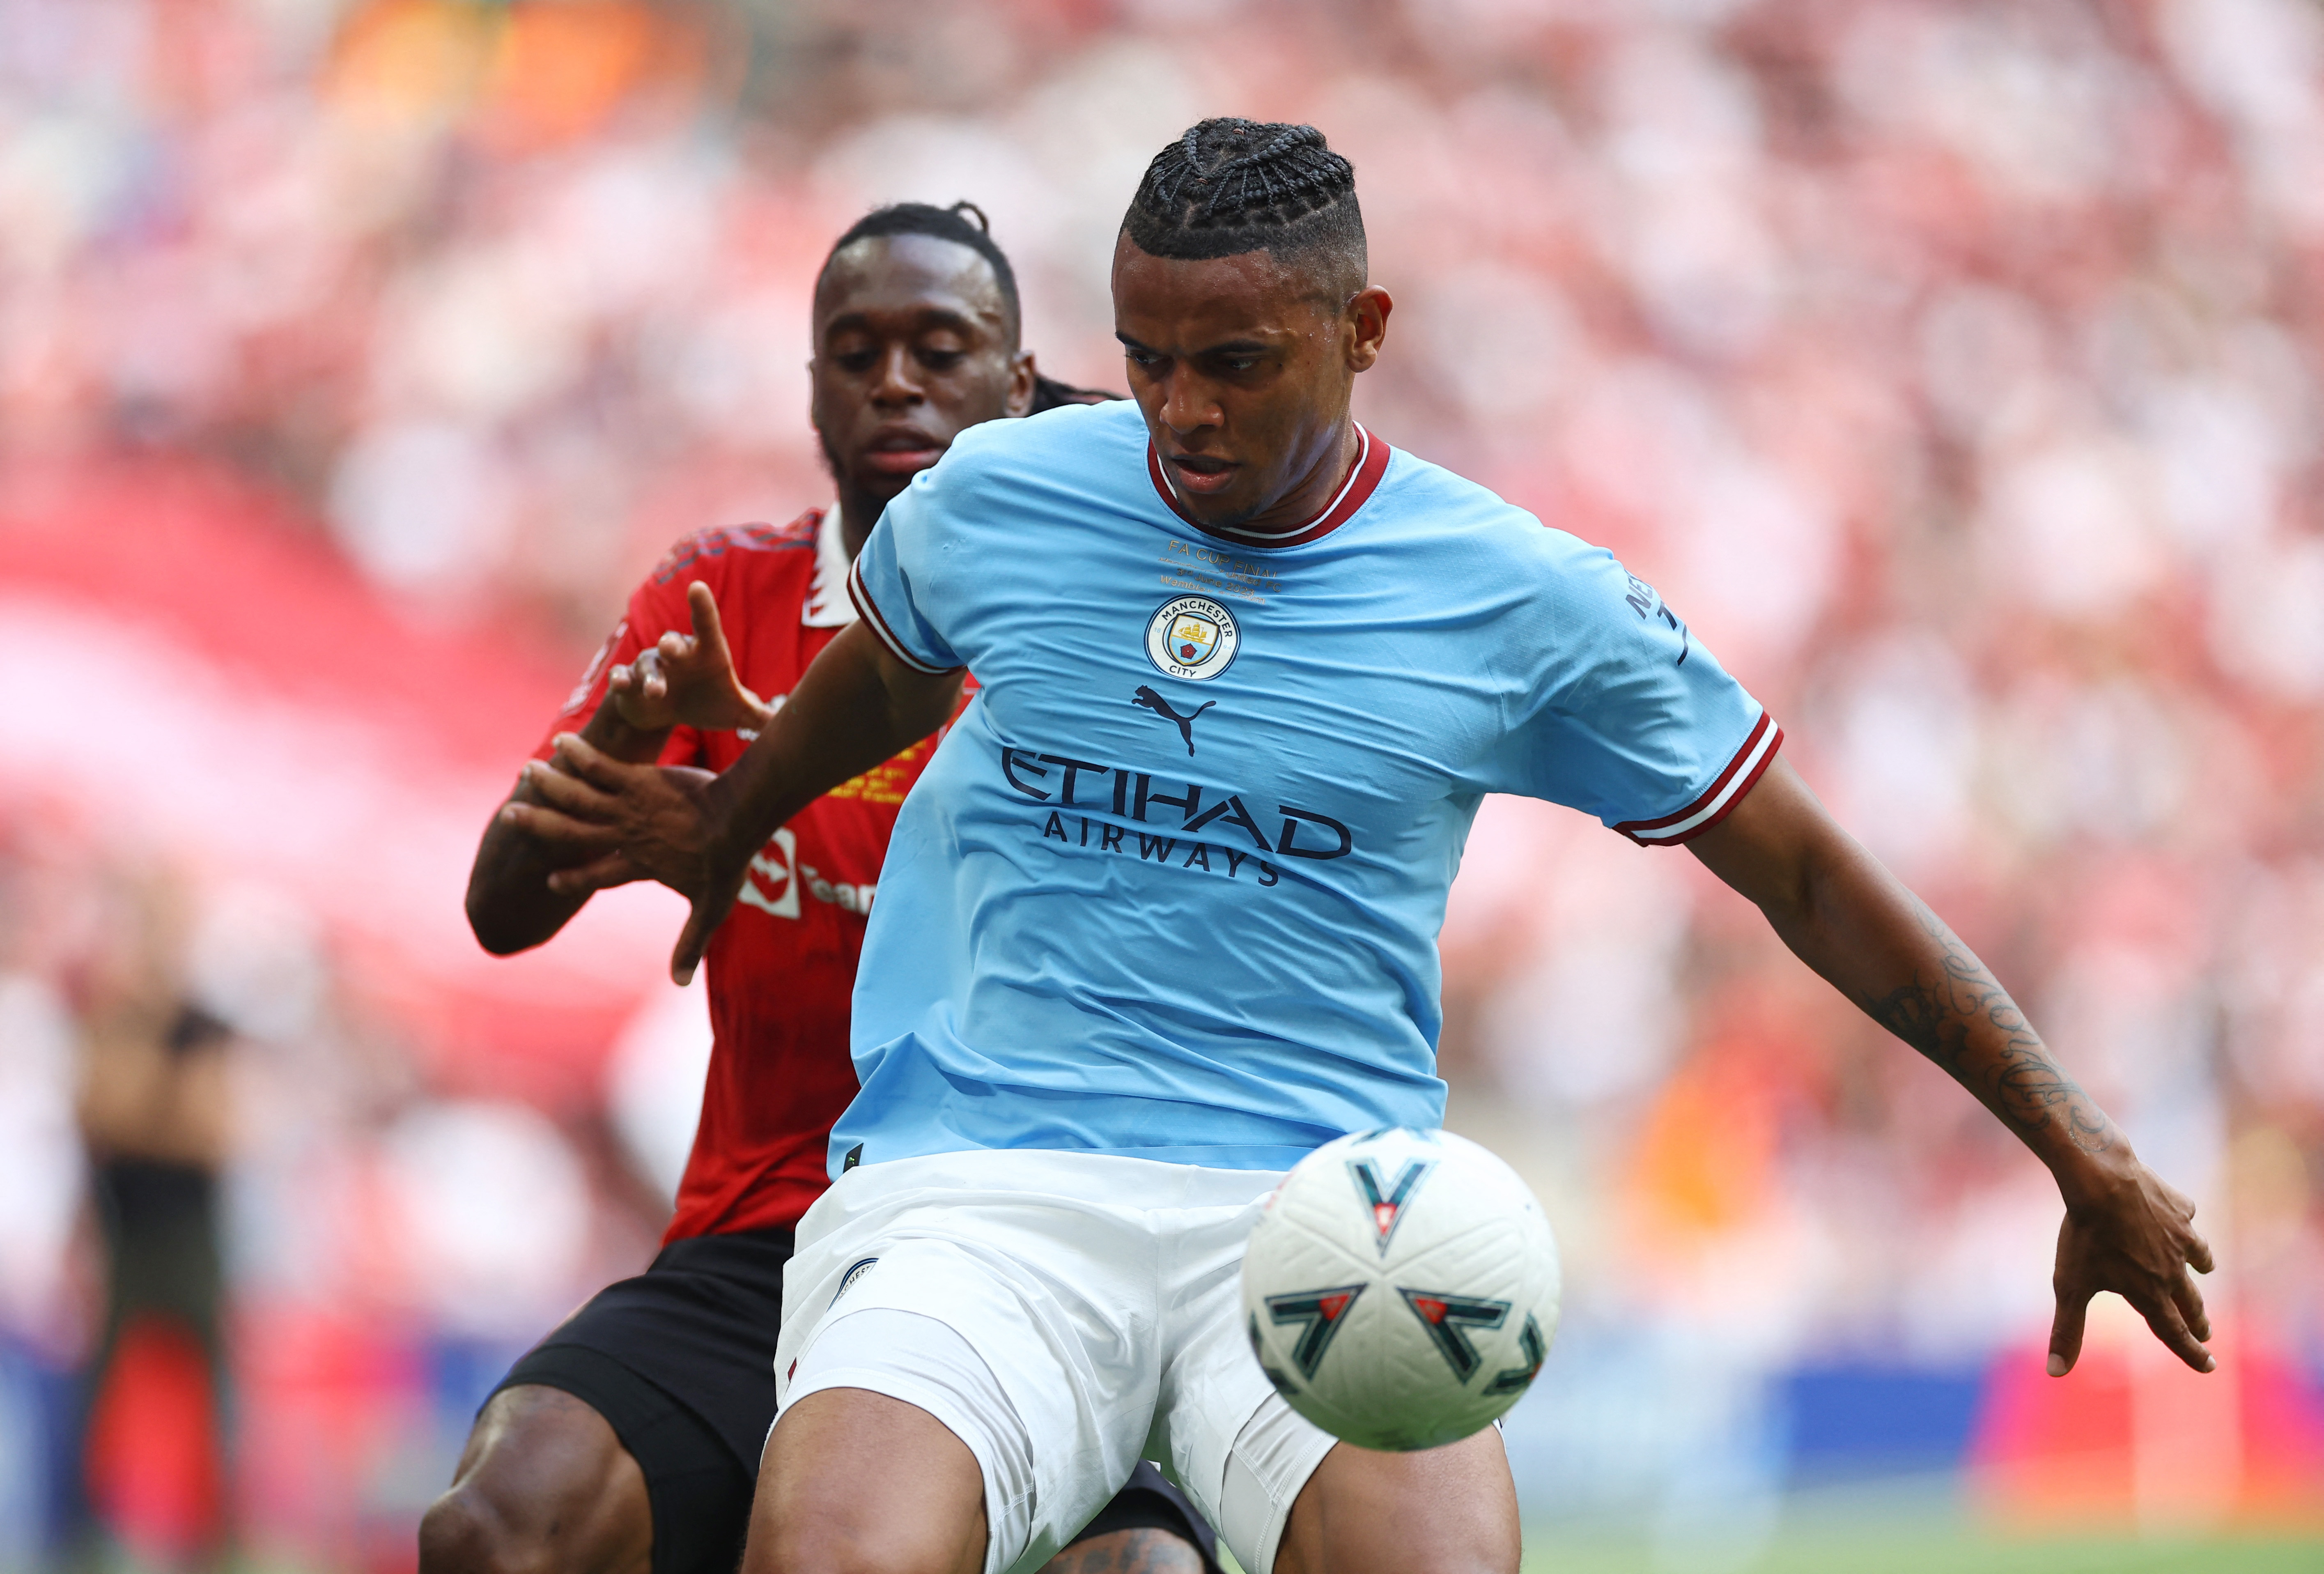 City to have Akanji, Foden back versus Fulham Reuters